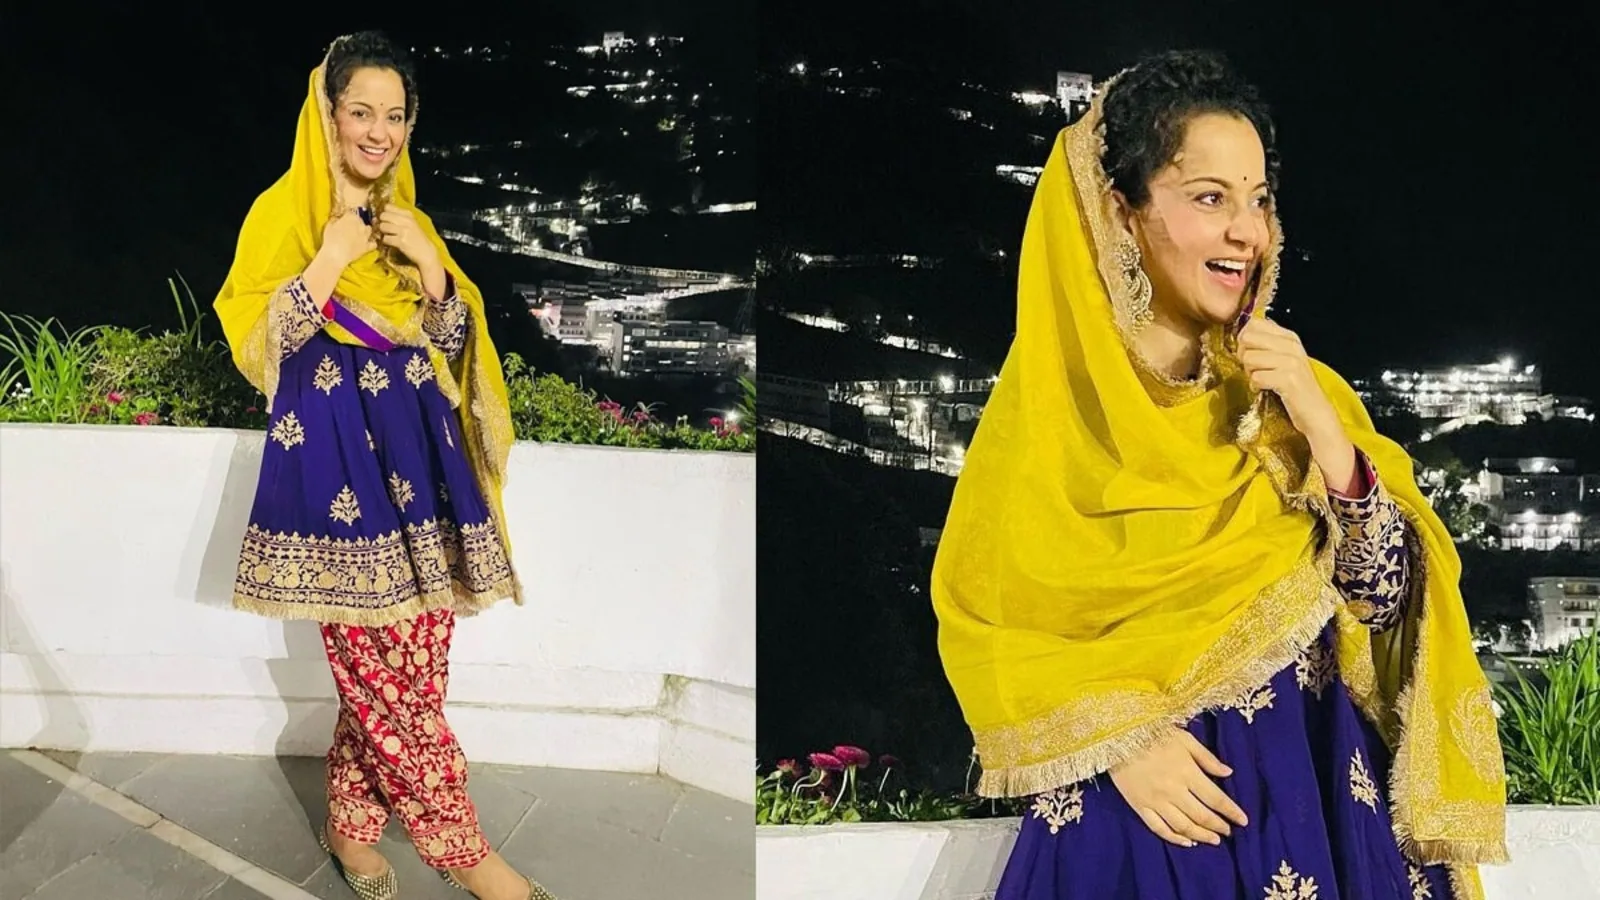 Kangana Ranaut visits Vaishno Devi on 35th birthday, smiles wide as she decks up in colourful attire. See pics